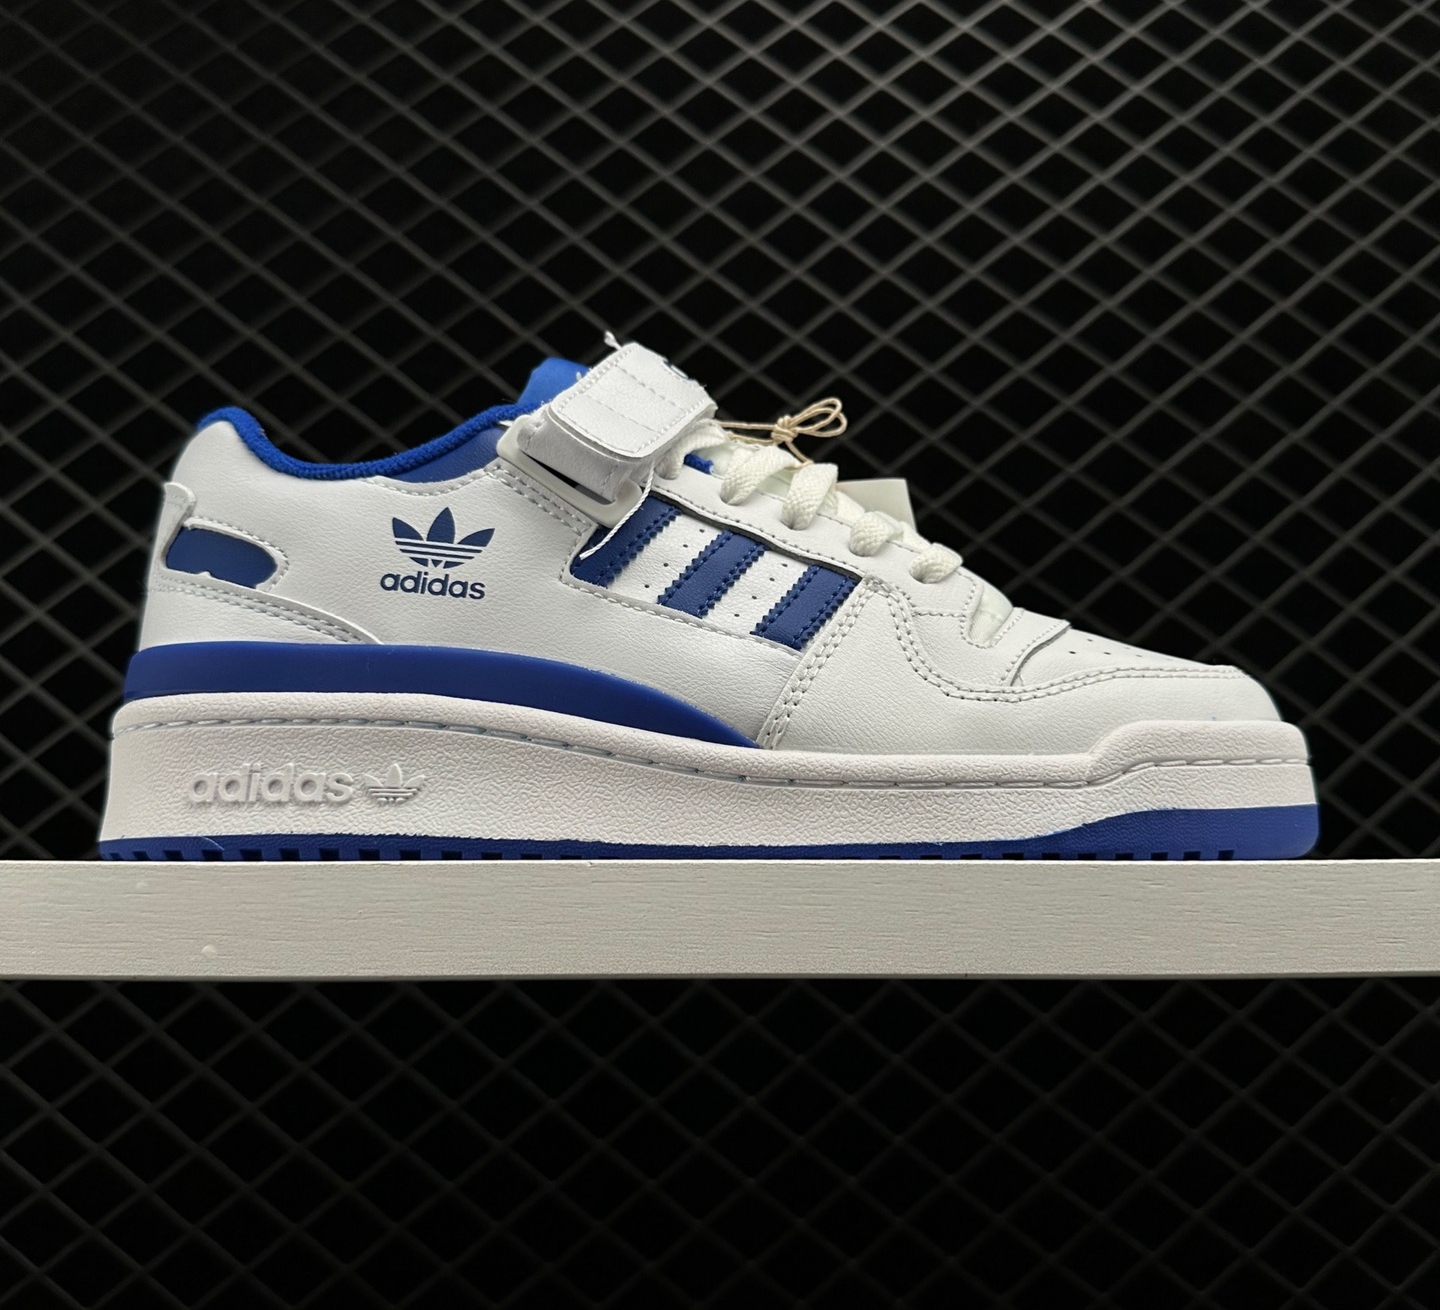 Adidas Forum Low White Royal Blue FY7756 - Classic Style & Luxury